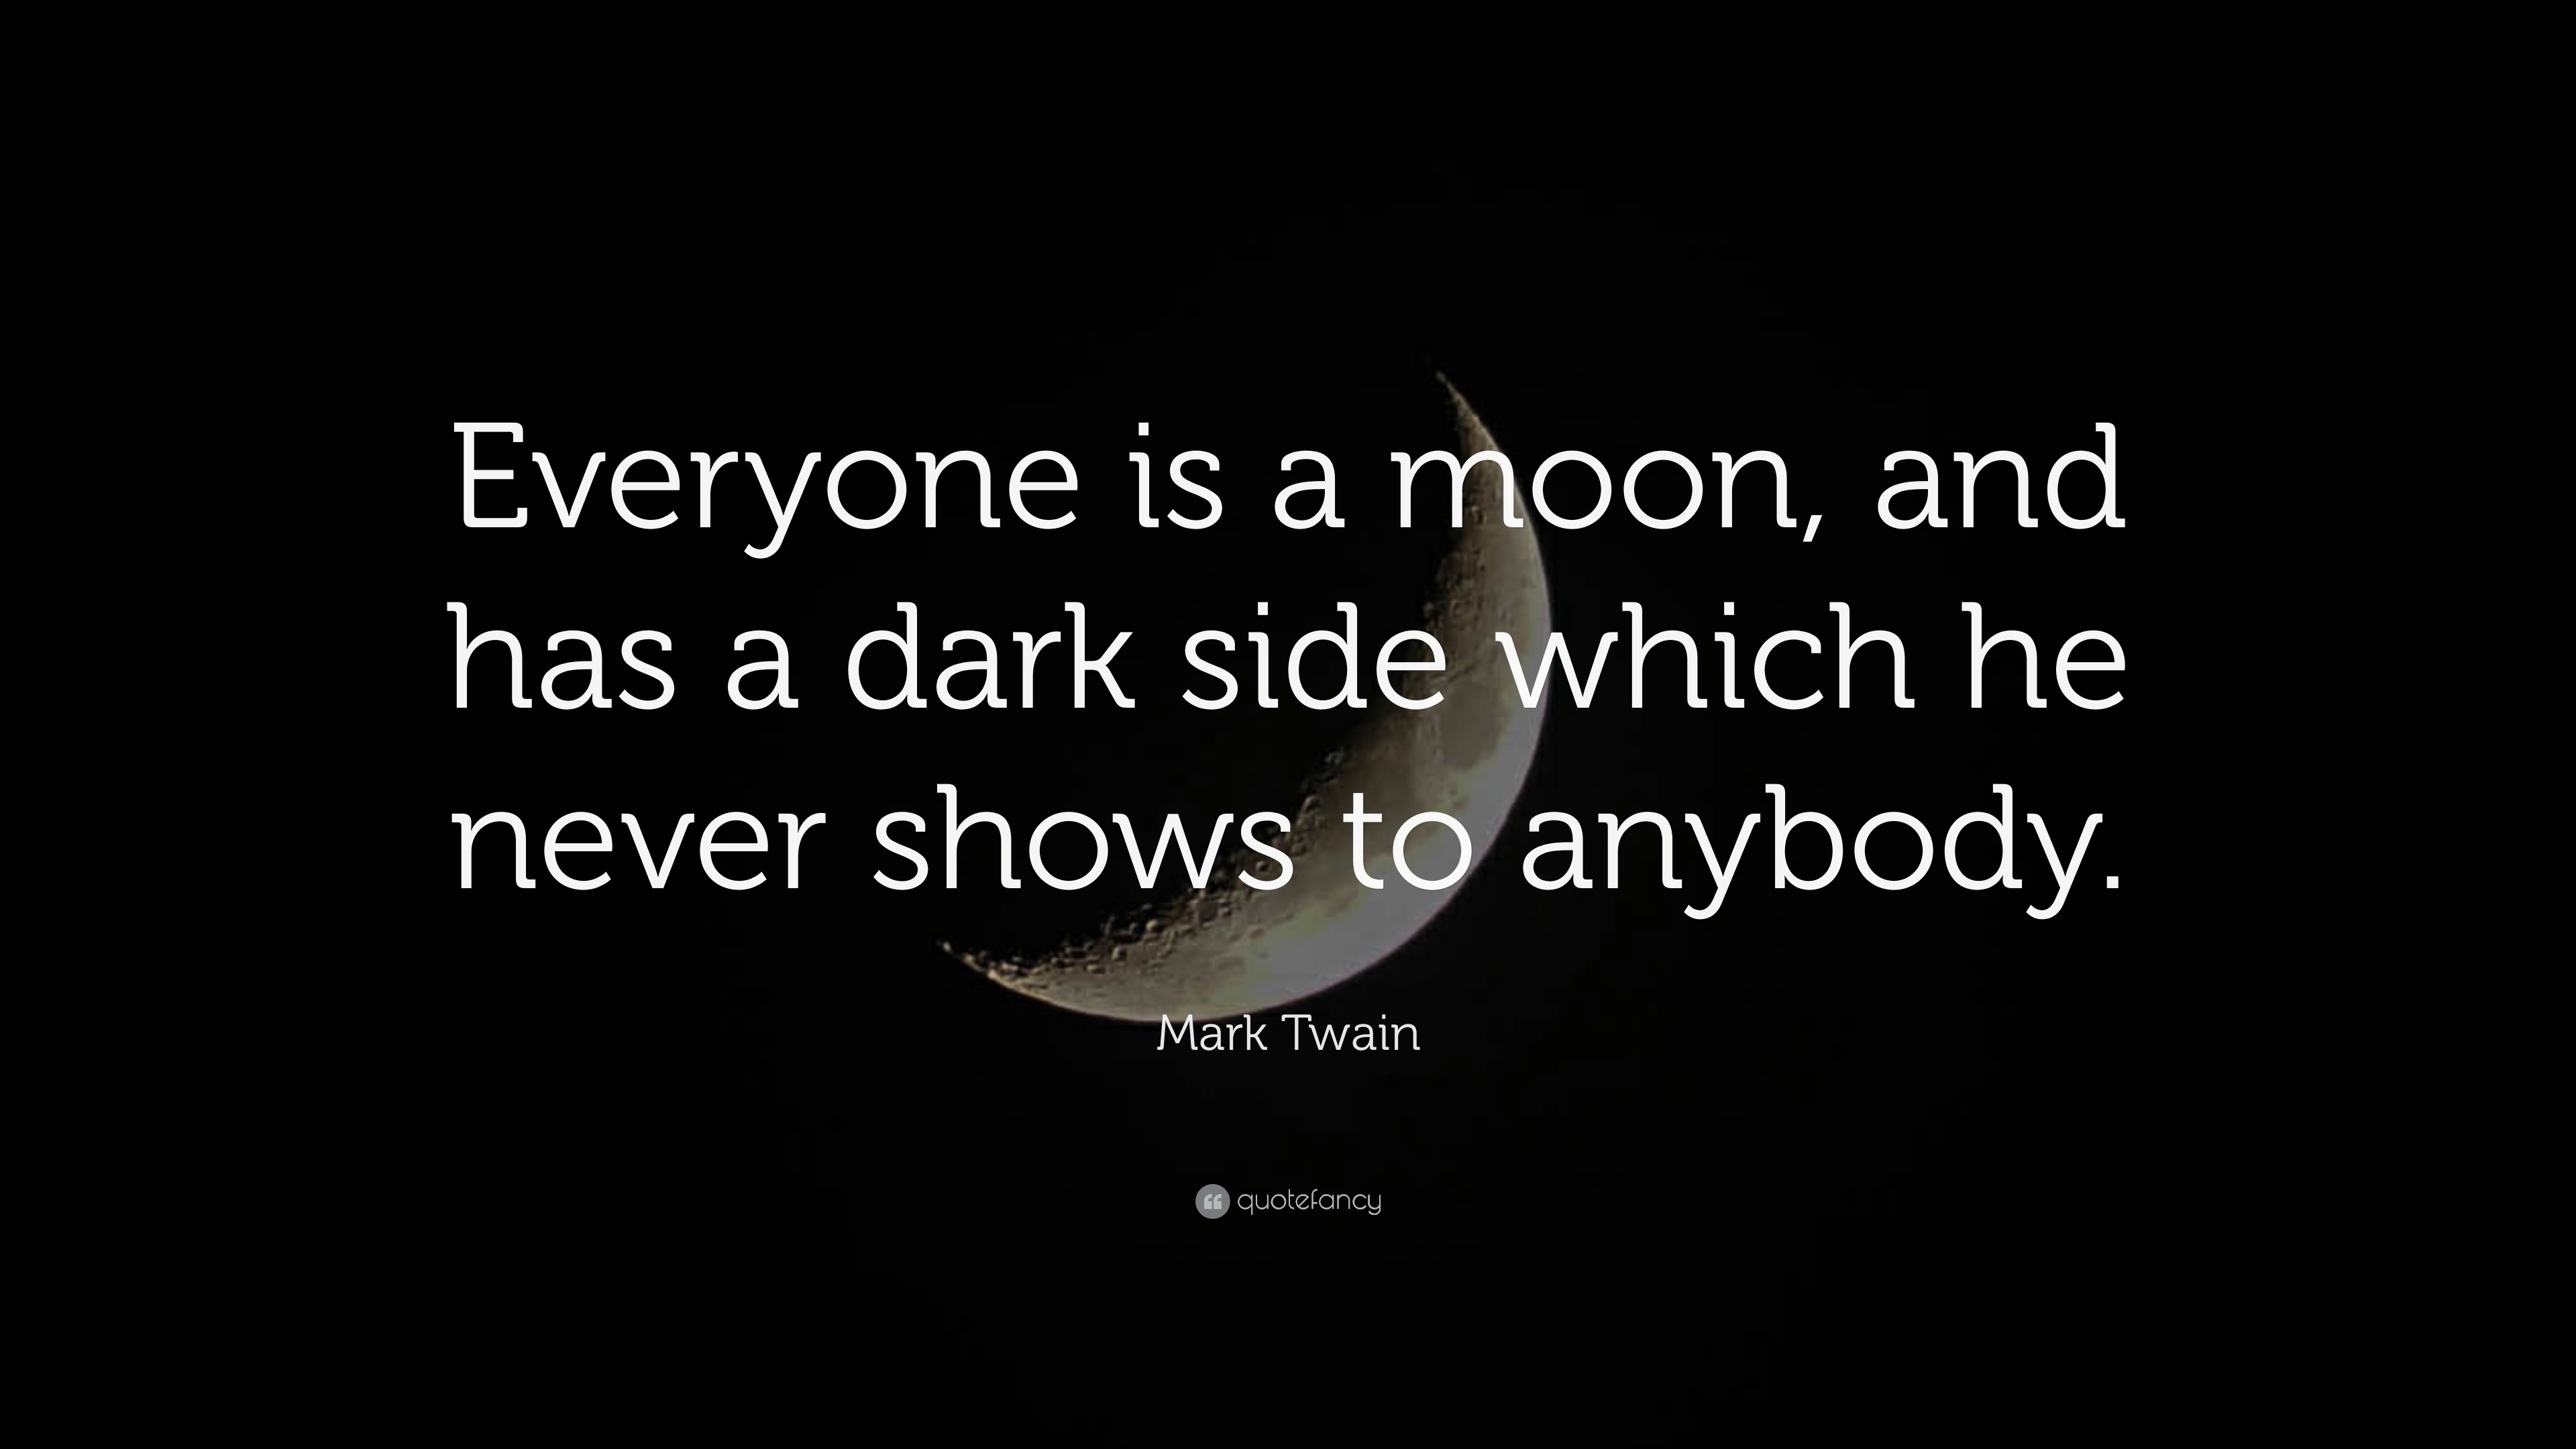 3840x2160 Mark Twain Quote: “Everyone is a moon, and has a dark side which